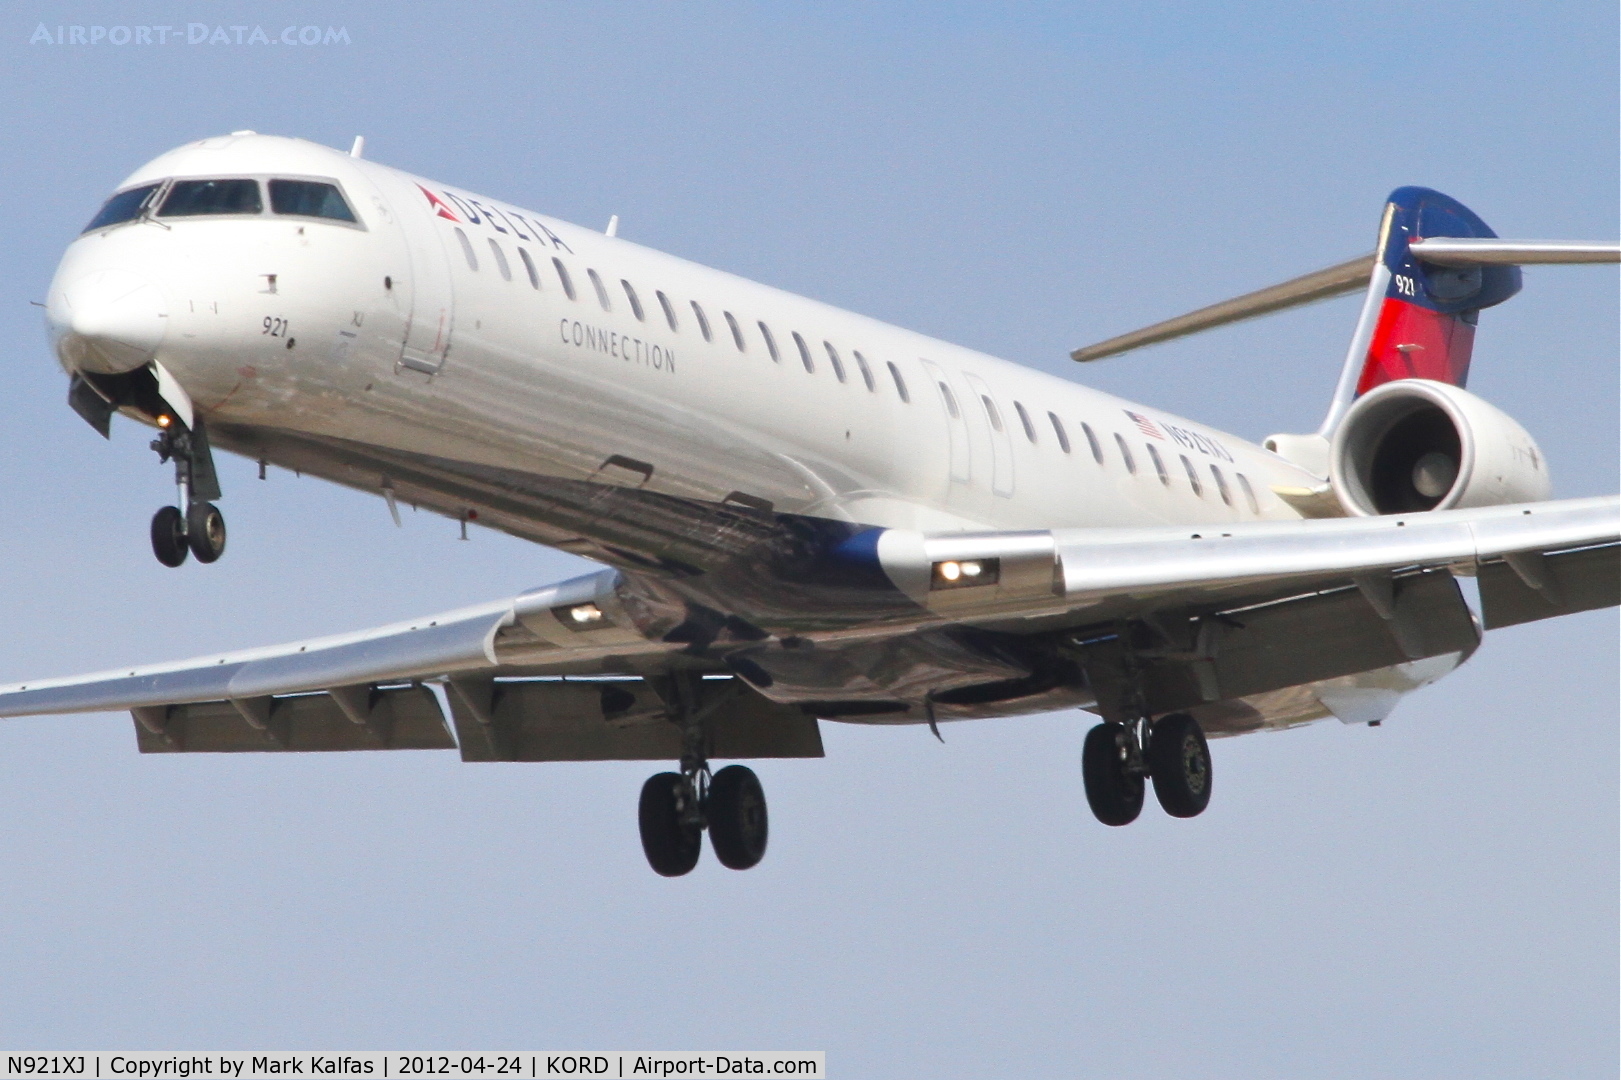 N921XJ, 2008 Bombardier CRJ-900ER (CL-600-2D24) C/N 15172, Pinnacle Airlines/Delta Connection Bombardier CL600-2D24, FLG3586 arriving from KMSP, RWY 28 approach KORD.